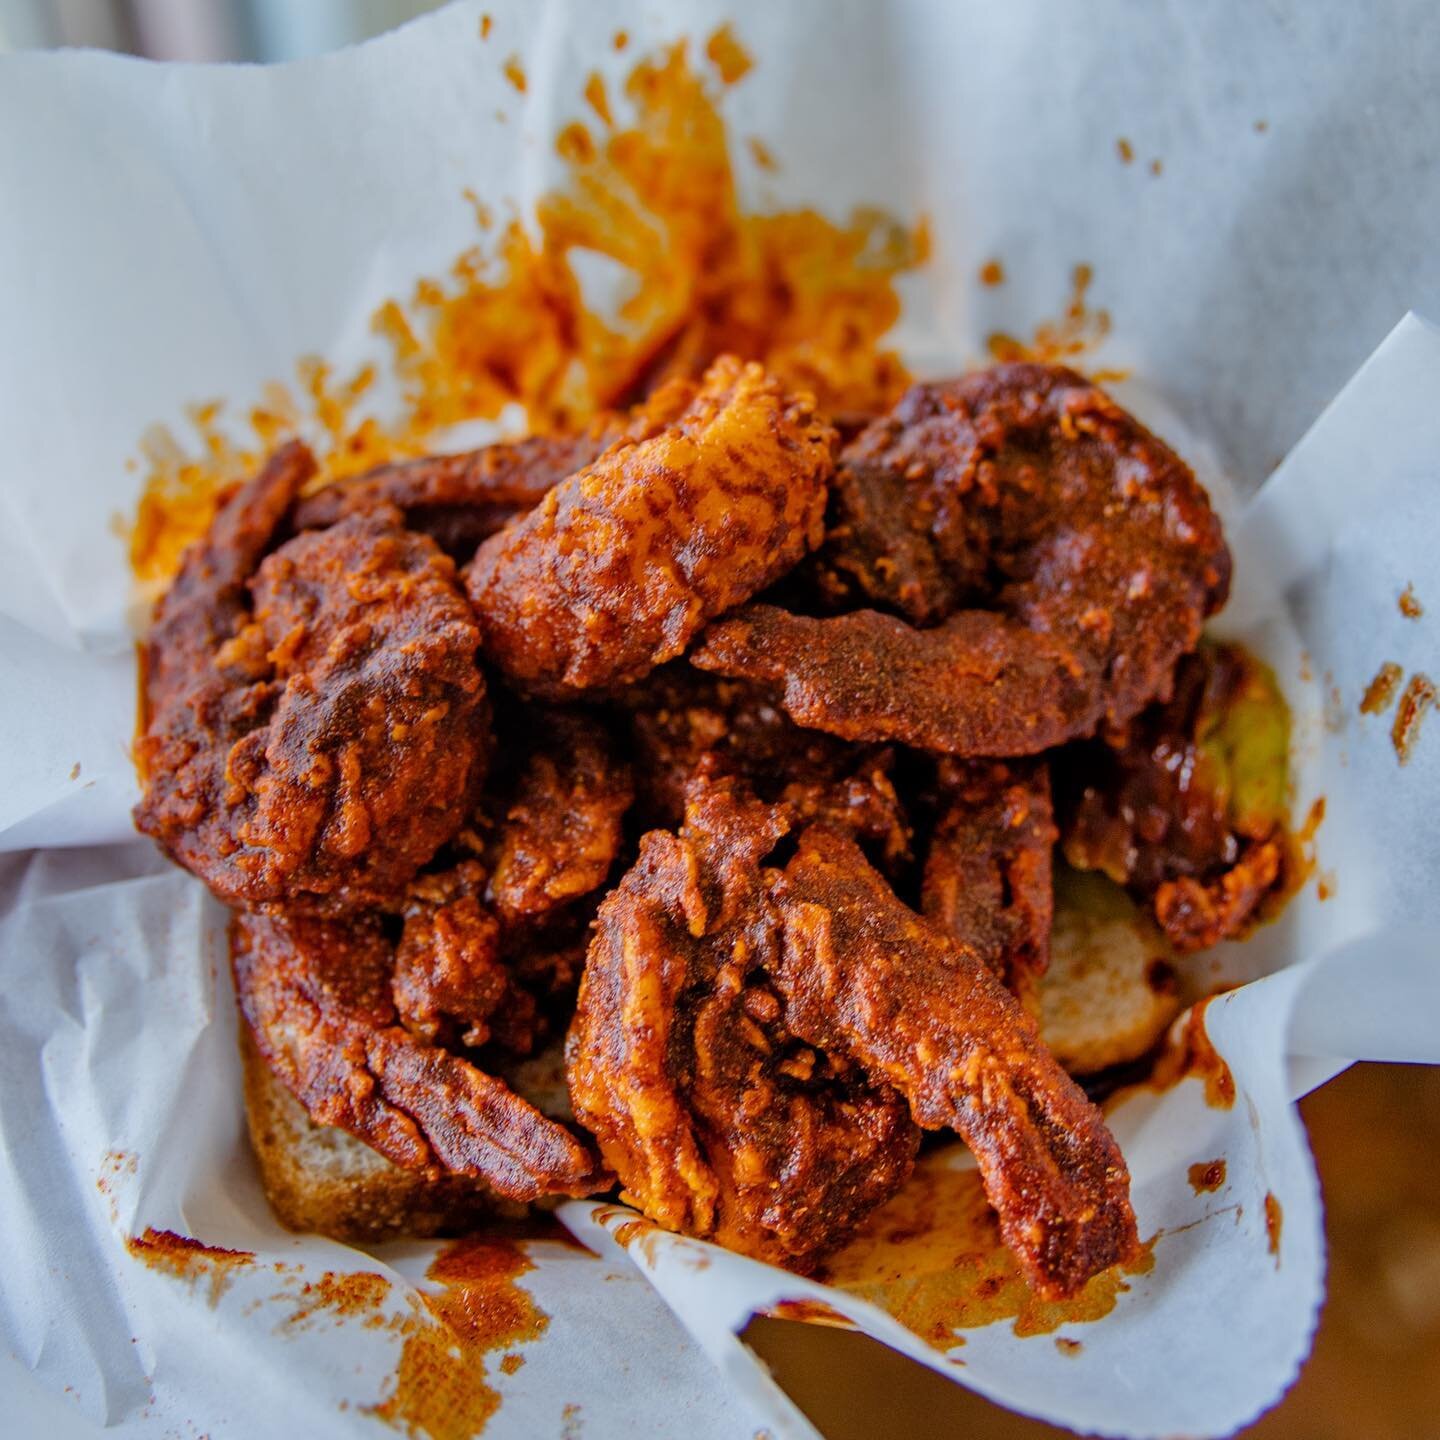 Where to eat Wednesday, hot chicken edition! @400degreeshotchicken 🔥
🐔🍤🔥
After being out of the country for the summer, 400 Degrees hit the spot to satisfy my hot chicken craving 🤤 (they ain&rsquo;t got hot chicken in Yemen yet 😆). We ordered t